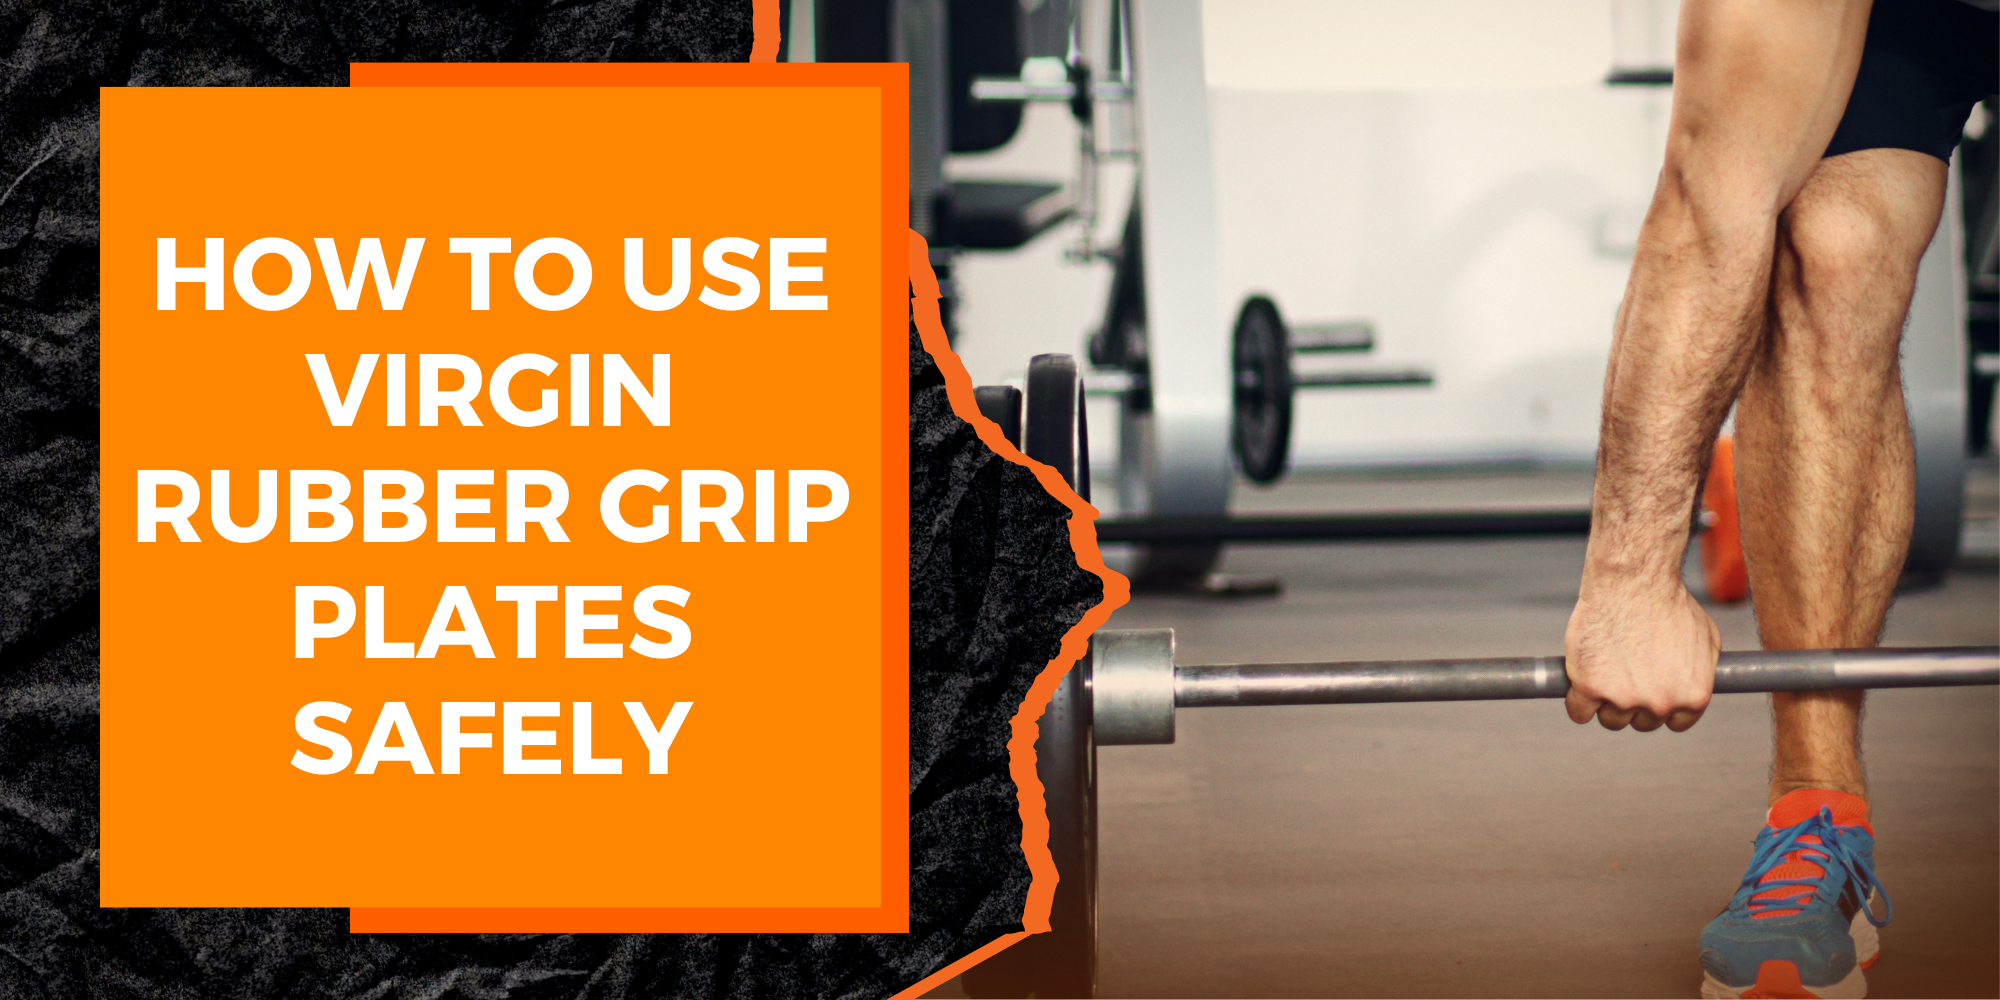 How to Use Virgin Rubber Grip Plates Safely